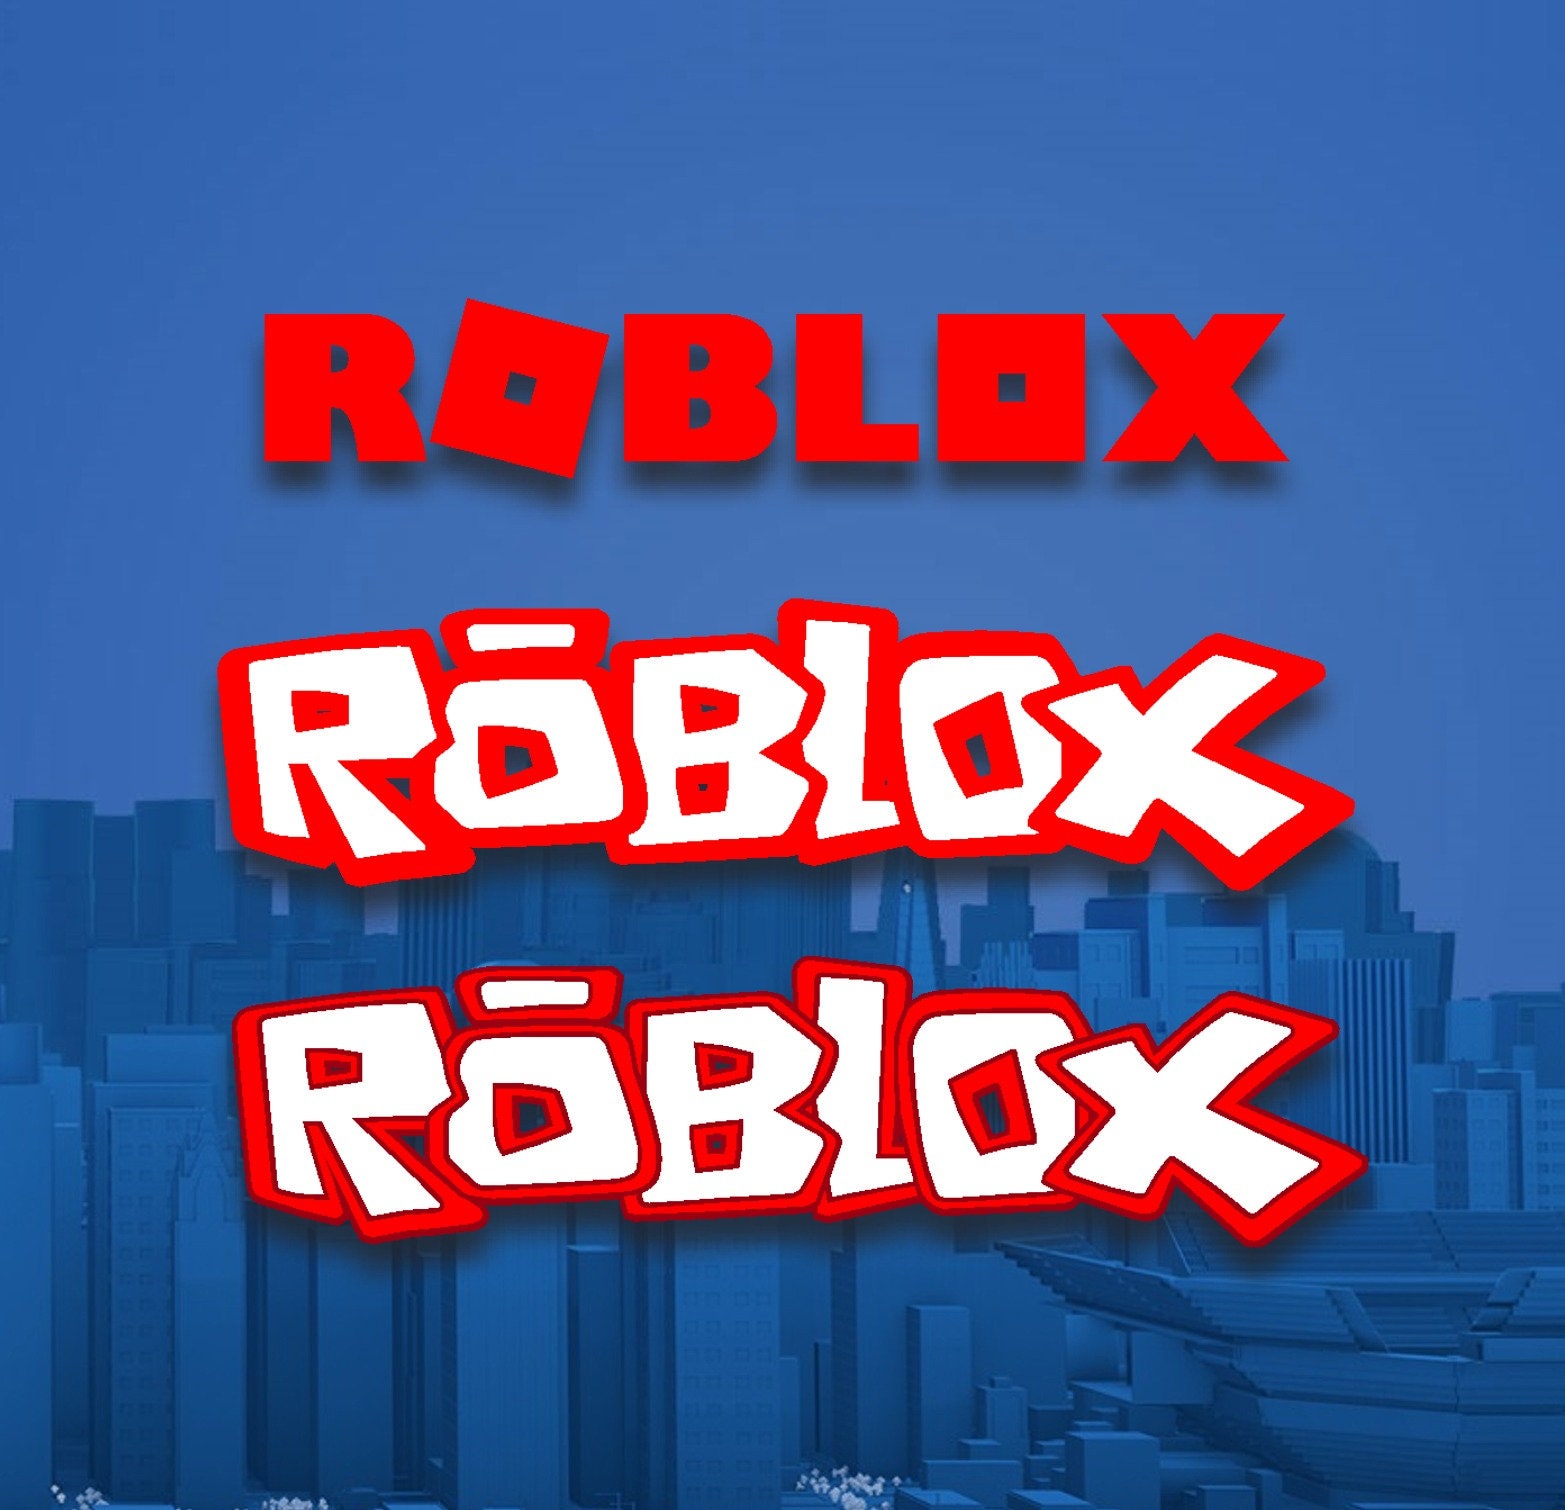 Roblox Svg - roblox r vector by iowntreese on deviantart in 2019 roblox